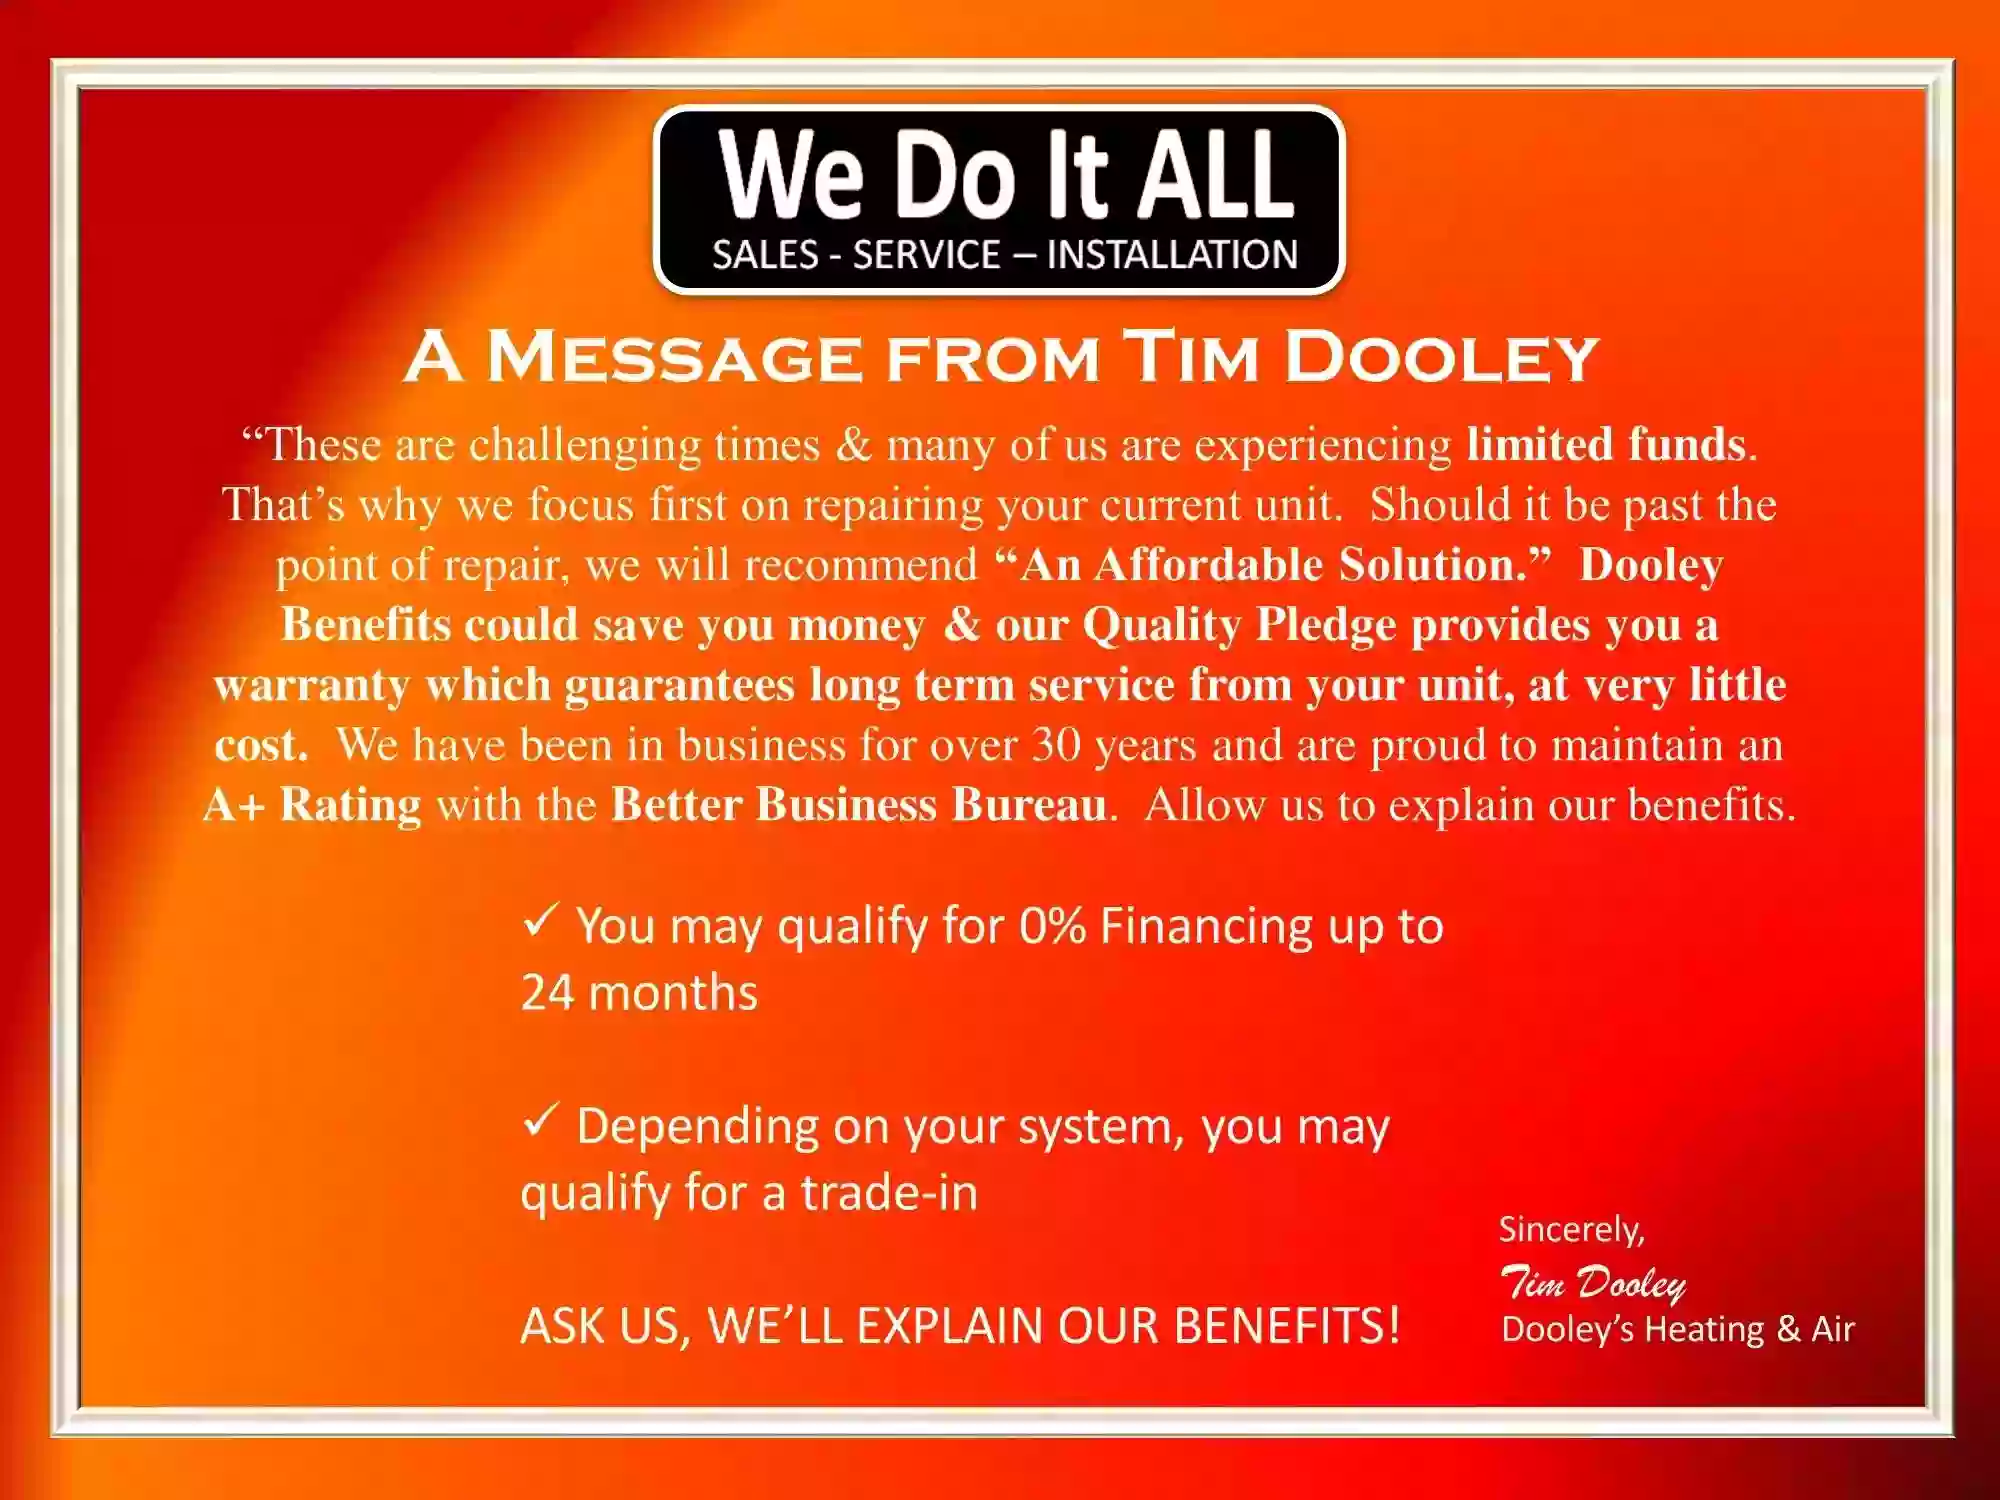 Dooley's Heating & Air Conditioning